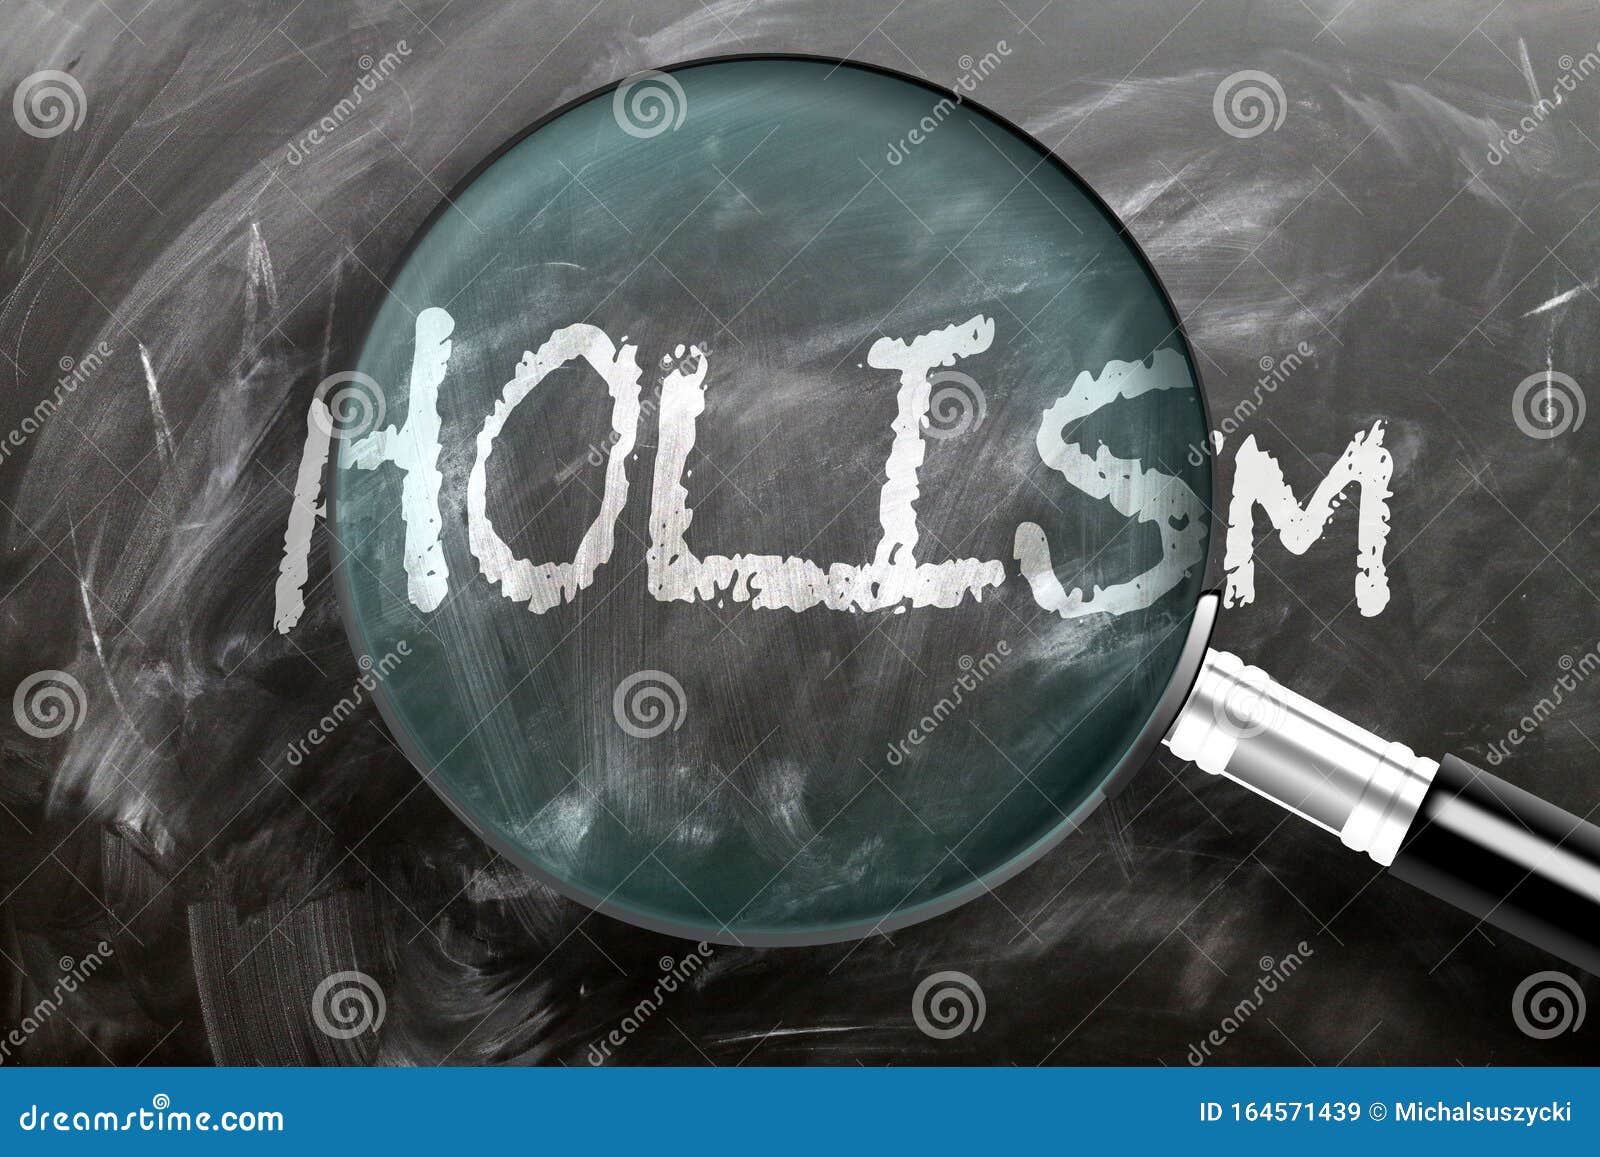 learn, study and inspect holism - pictured as a magnifying glass enlarging word holism, izes researching, exploring and